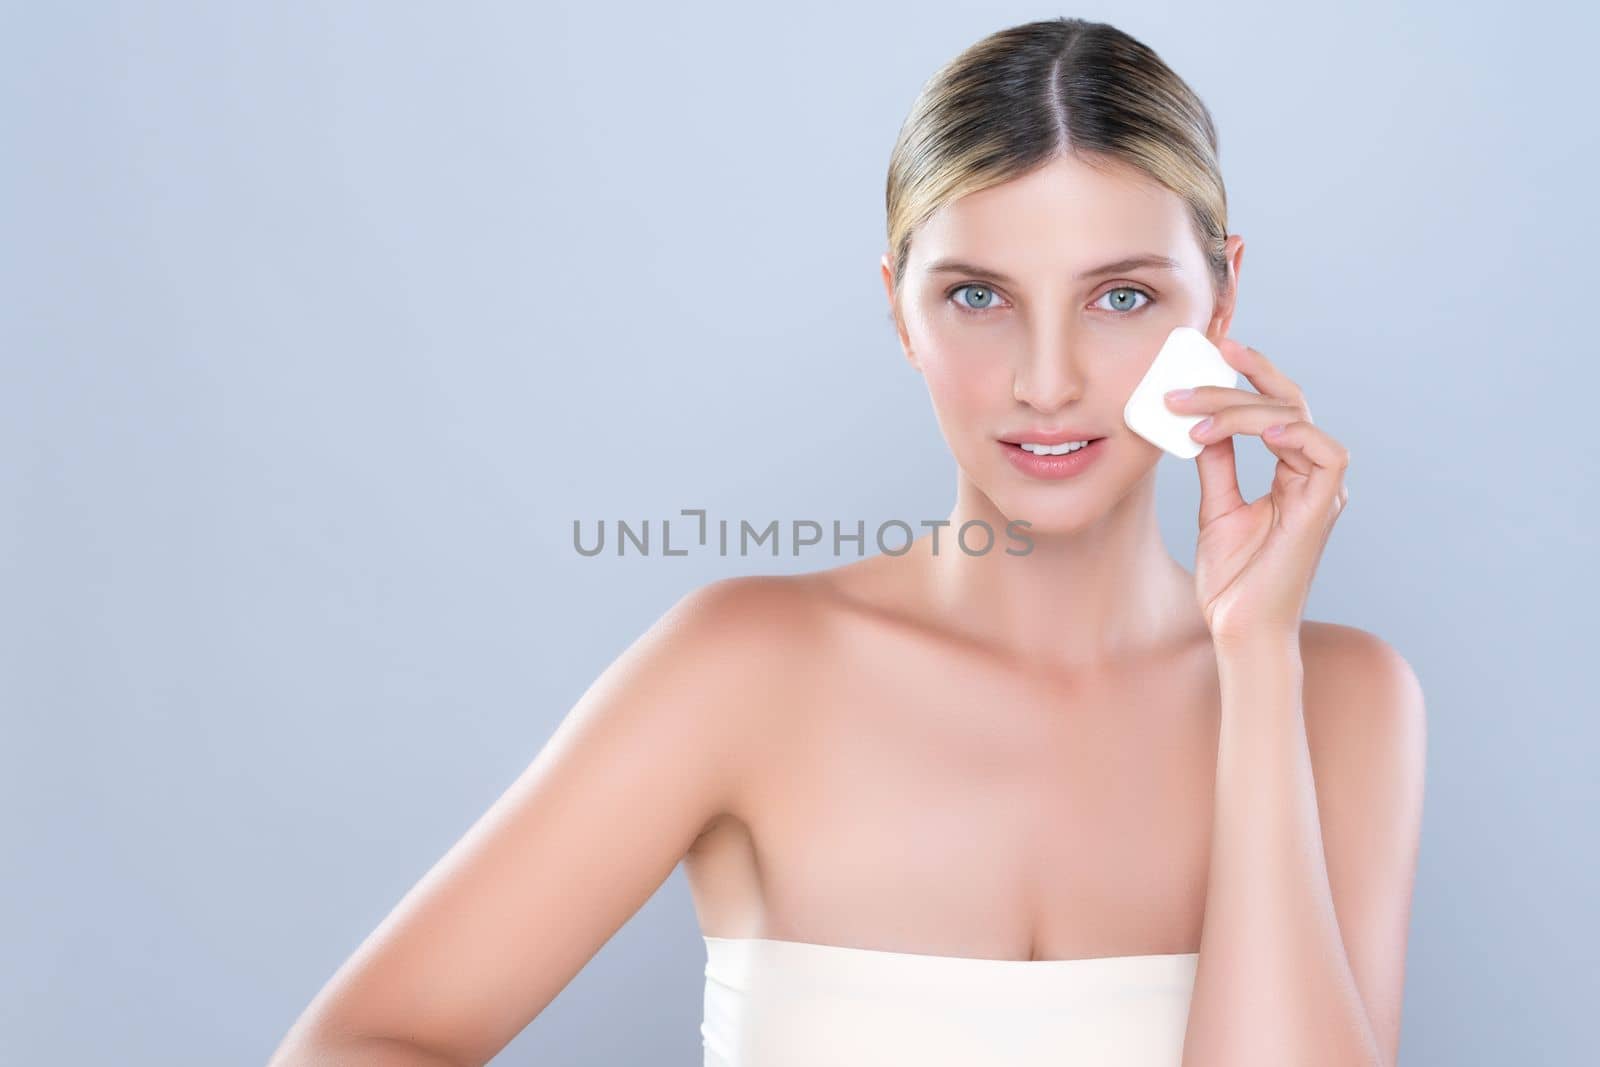 Alluring beautiful female model applying powder puff for facial makeup concept. Portrait of flawless perfect cosmetic skin woman put powder foundation on her face in isolated background.